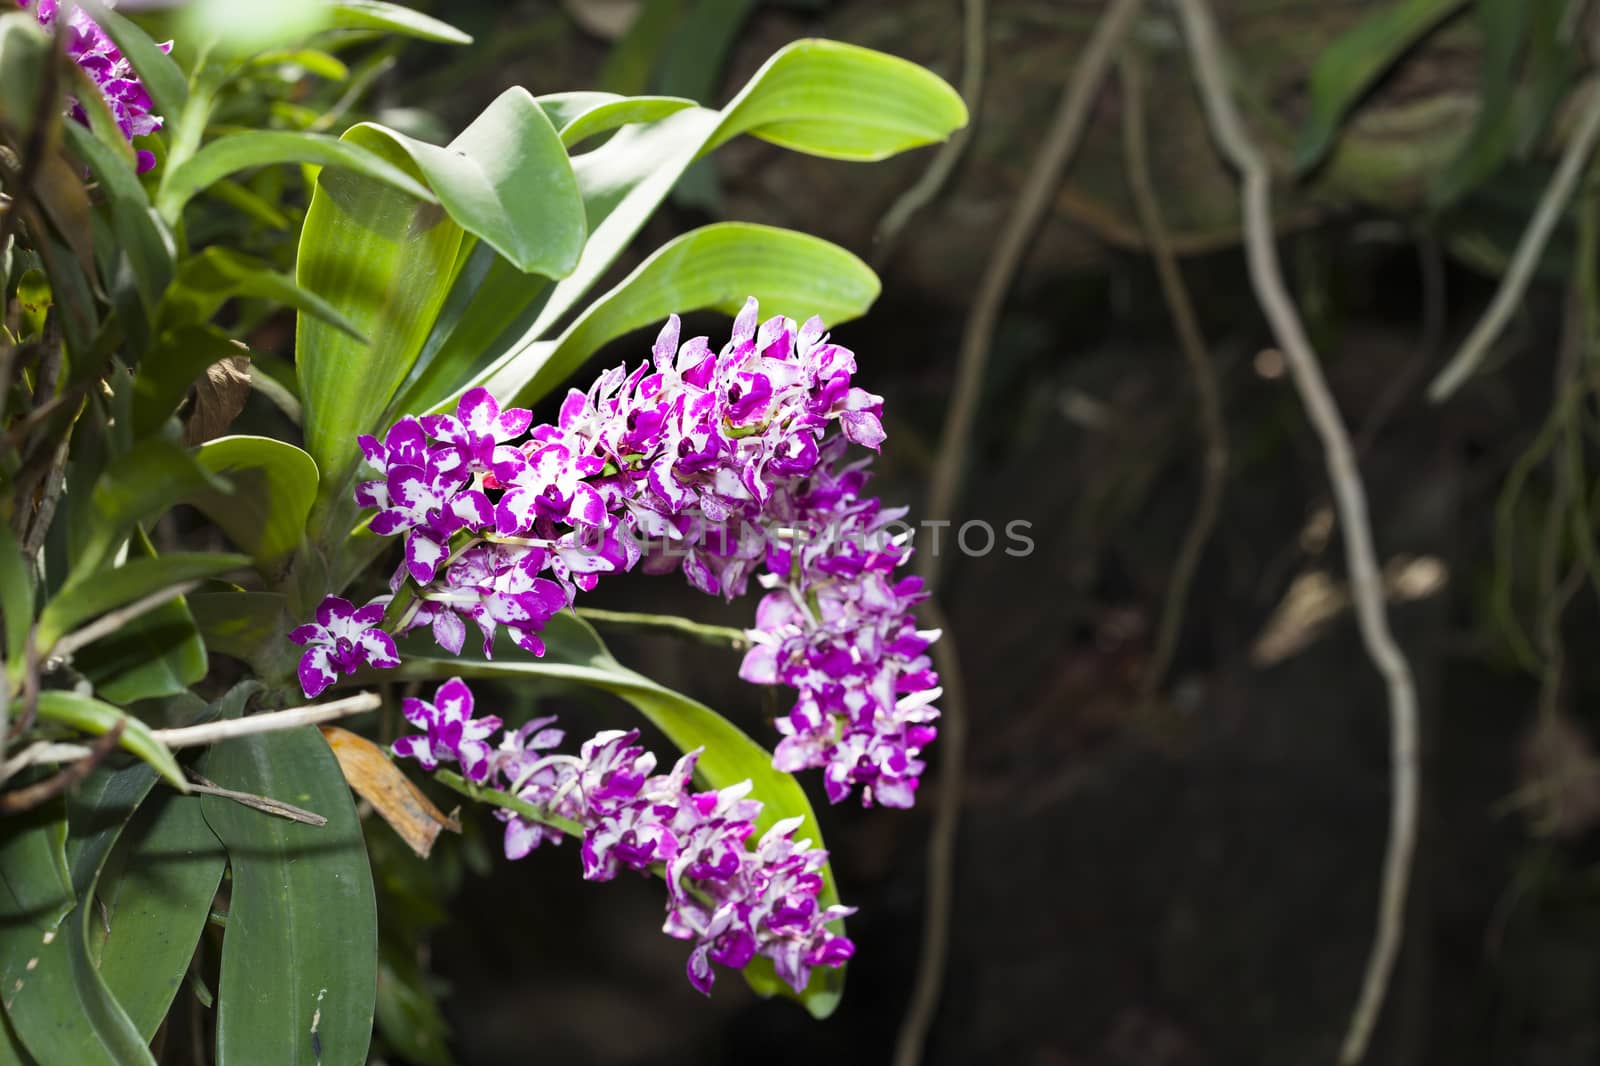 Purple orchid in the garden, Rhynchostylis flowers are fragrant.